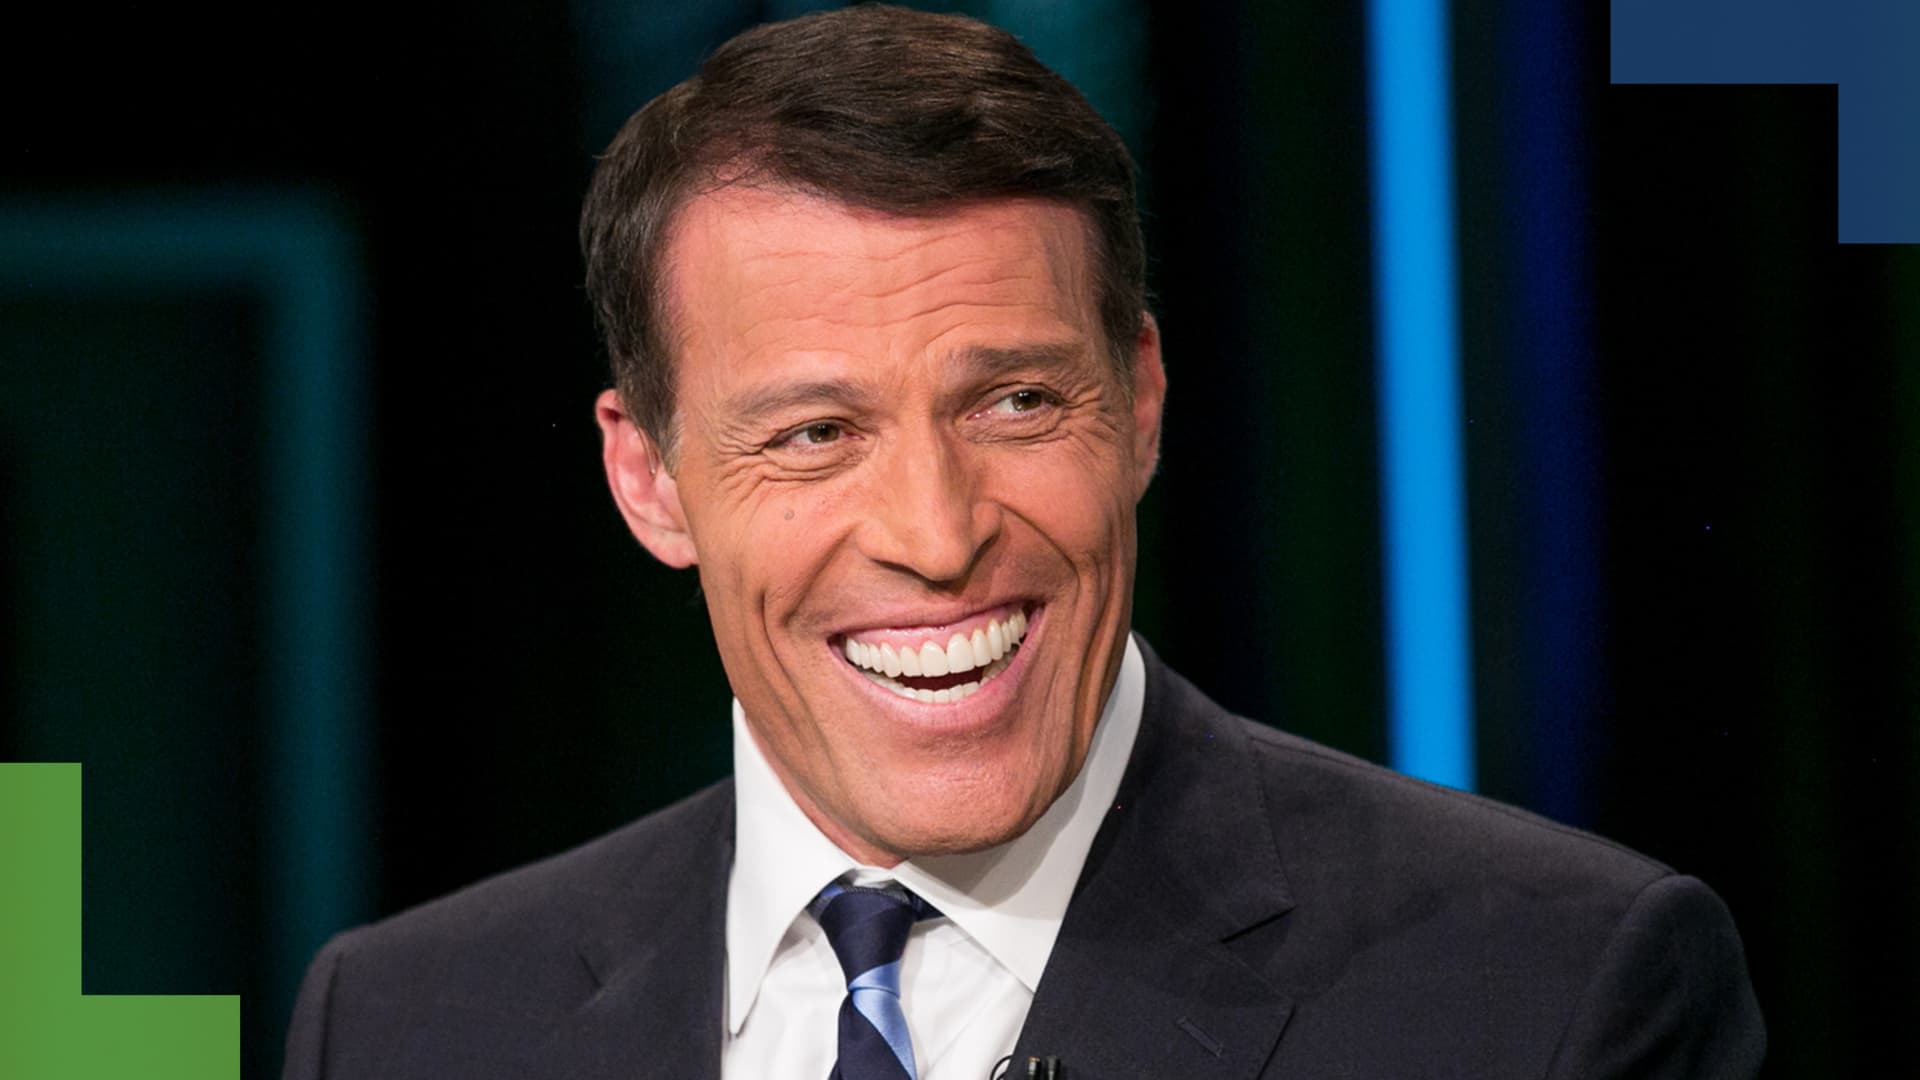 10 Tips on How to Find Your Passion with Tony Robbins